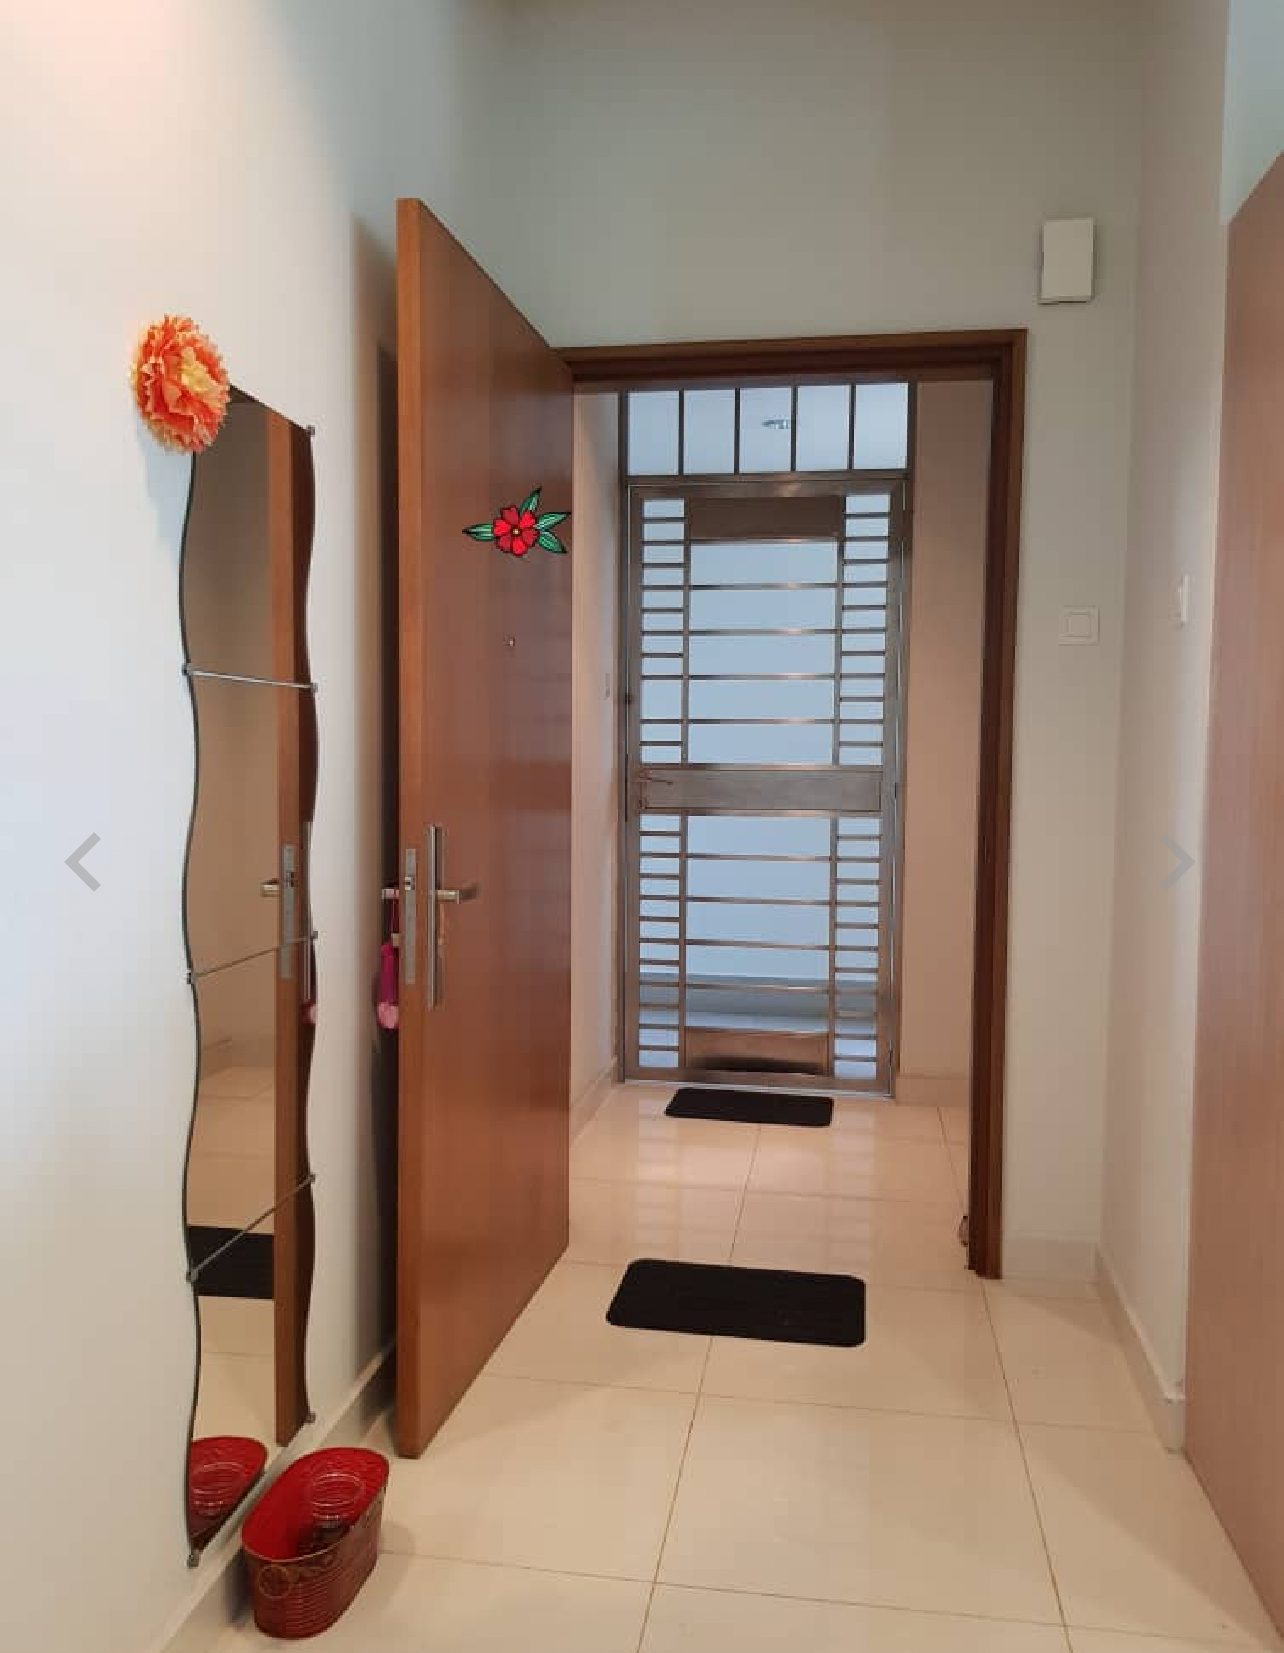 room for rent, studio, jalan eriena, Send the owner a message on WhatsApp/facebook if you want to RENT the unit facebook (Mohammed Nhat)&Telegram(@muhammednhat101) Fully furnished non sharing :(comfortable)